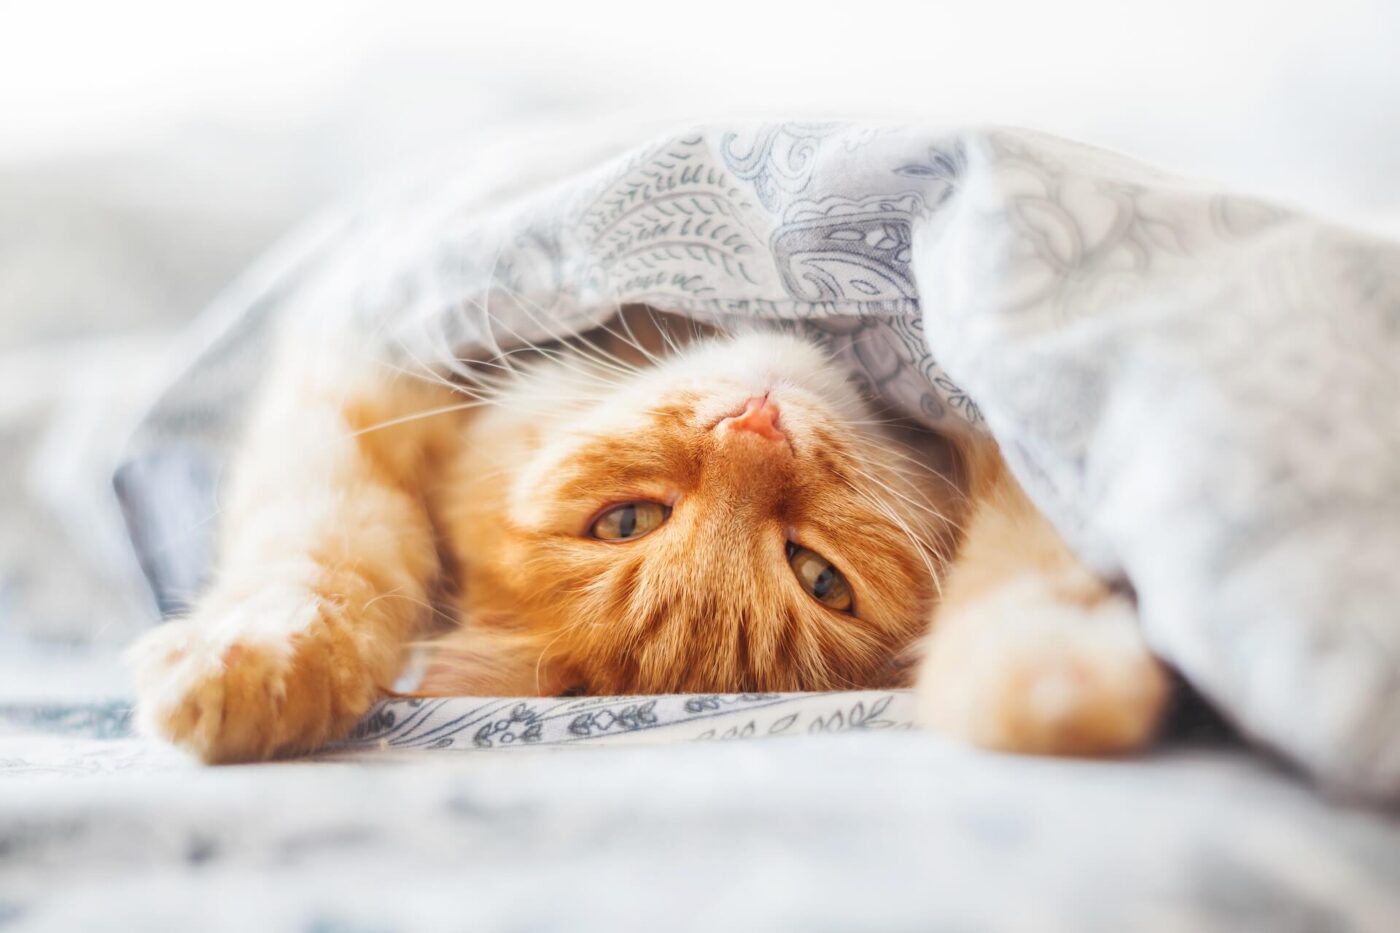 A happy cat snuggling in the blankets